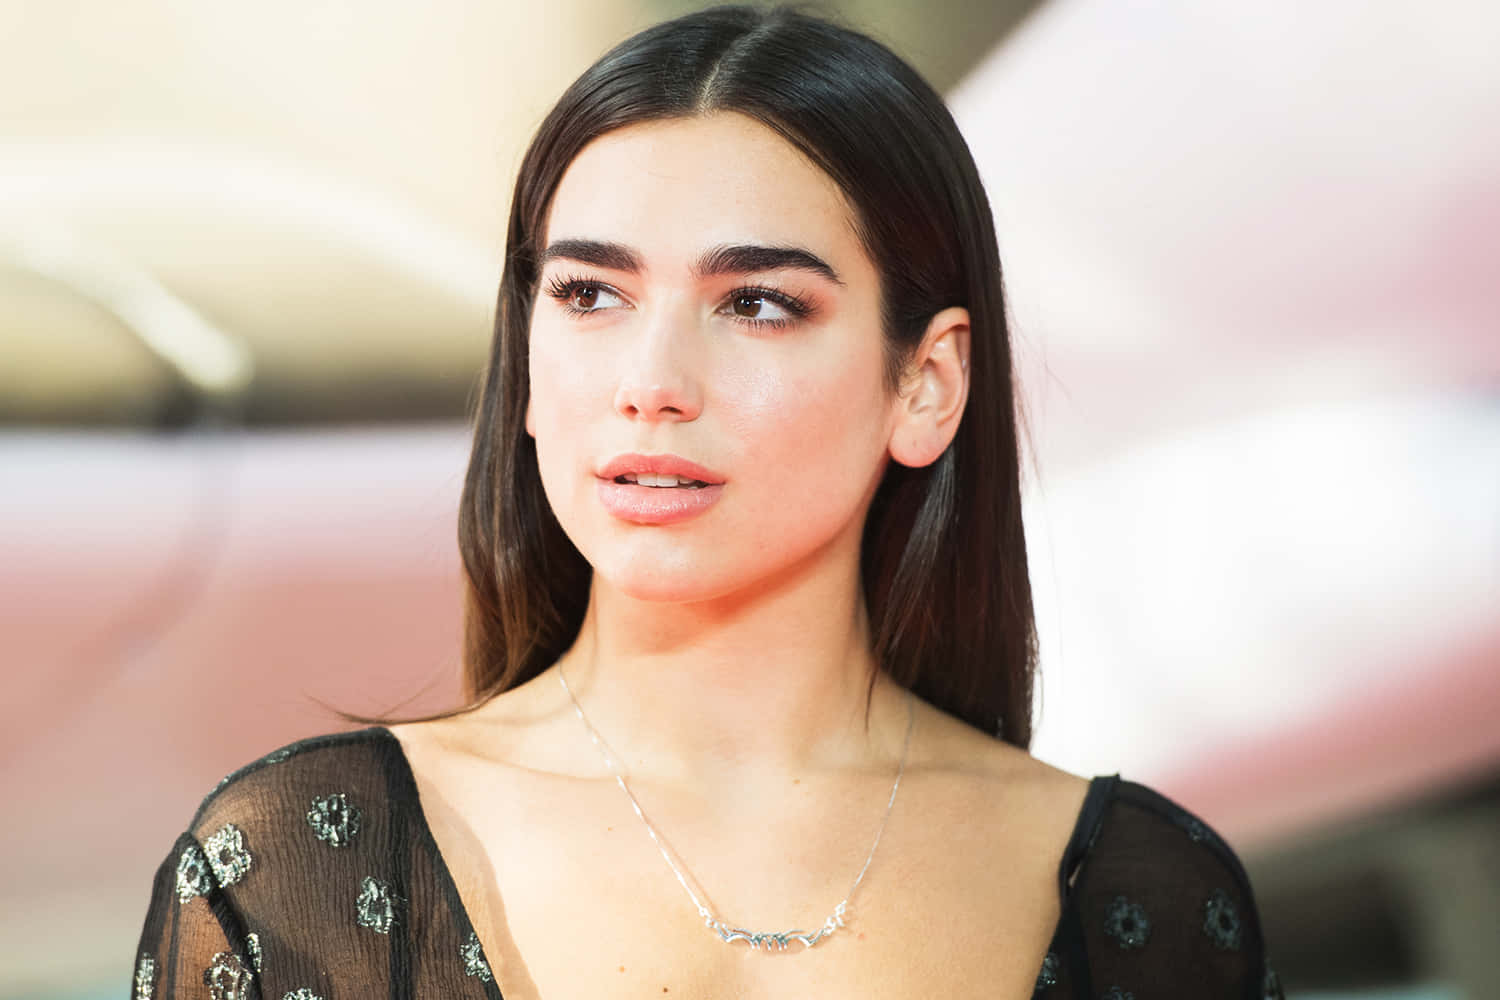 Dua Lipa exudes beauty and confidence in this stylish photo.